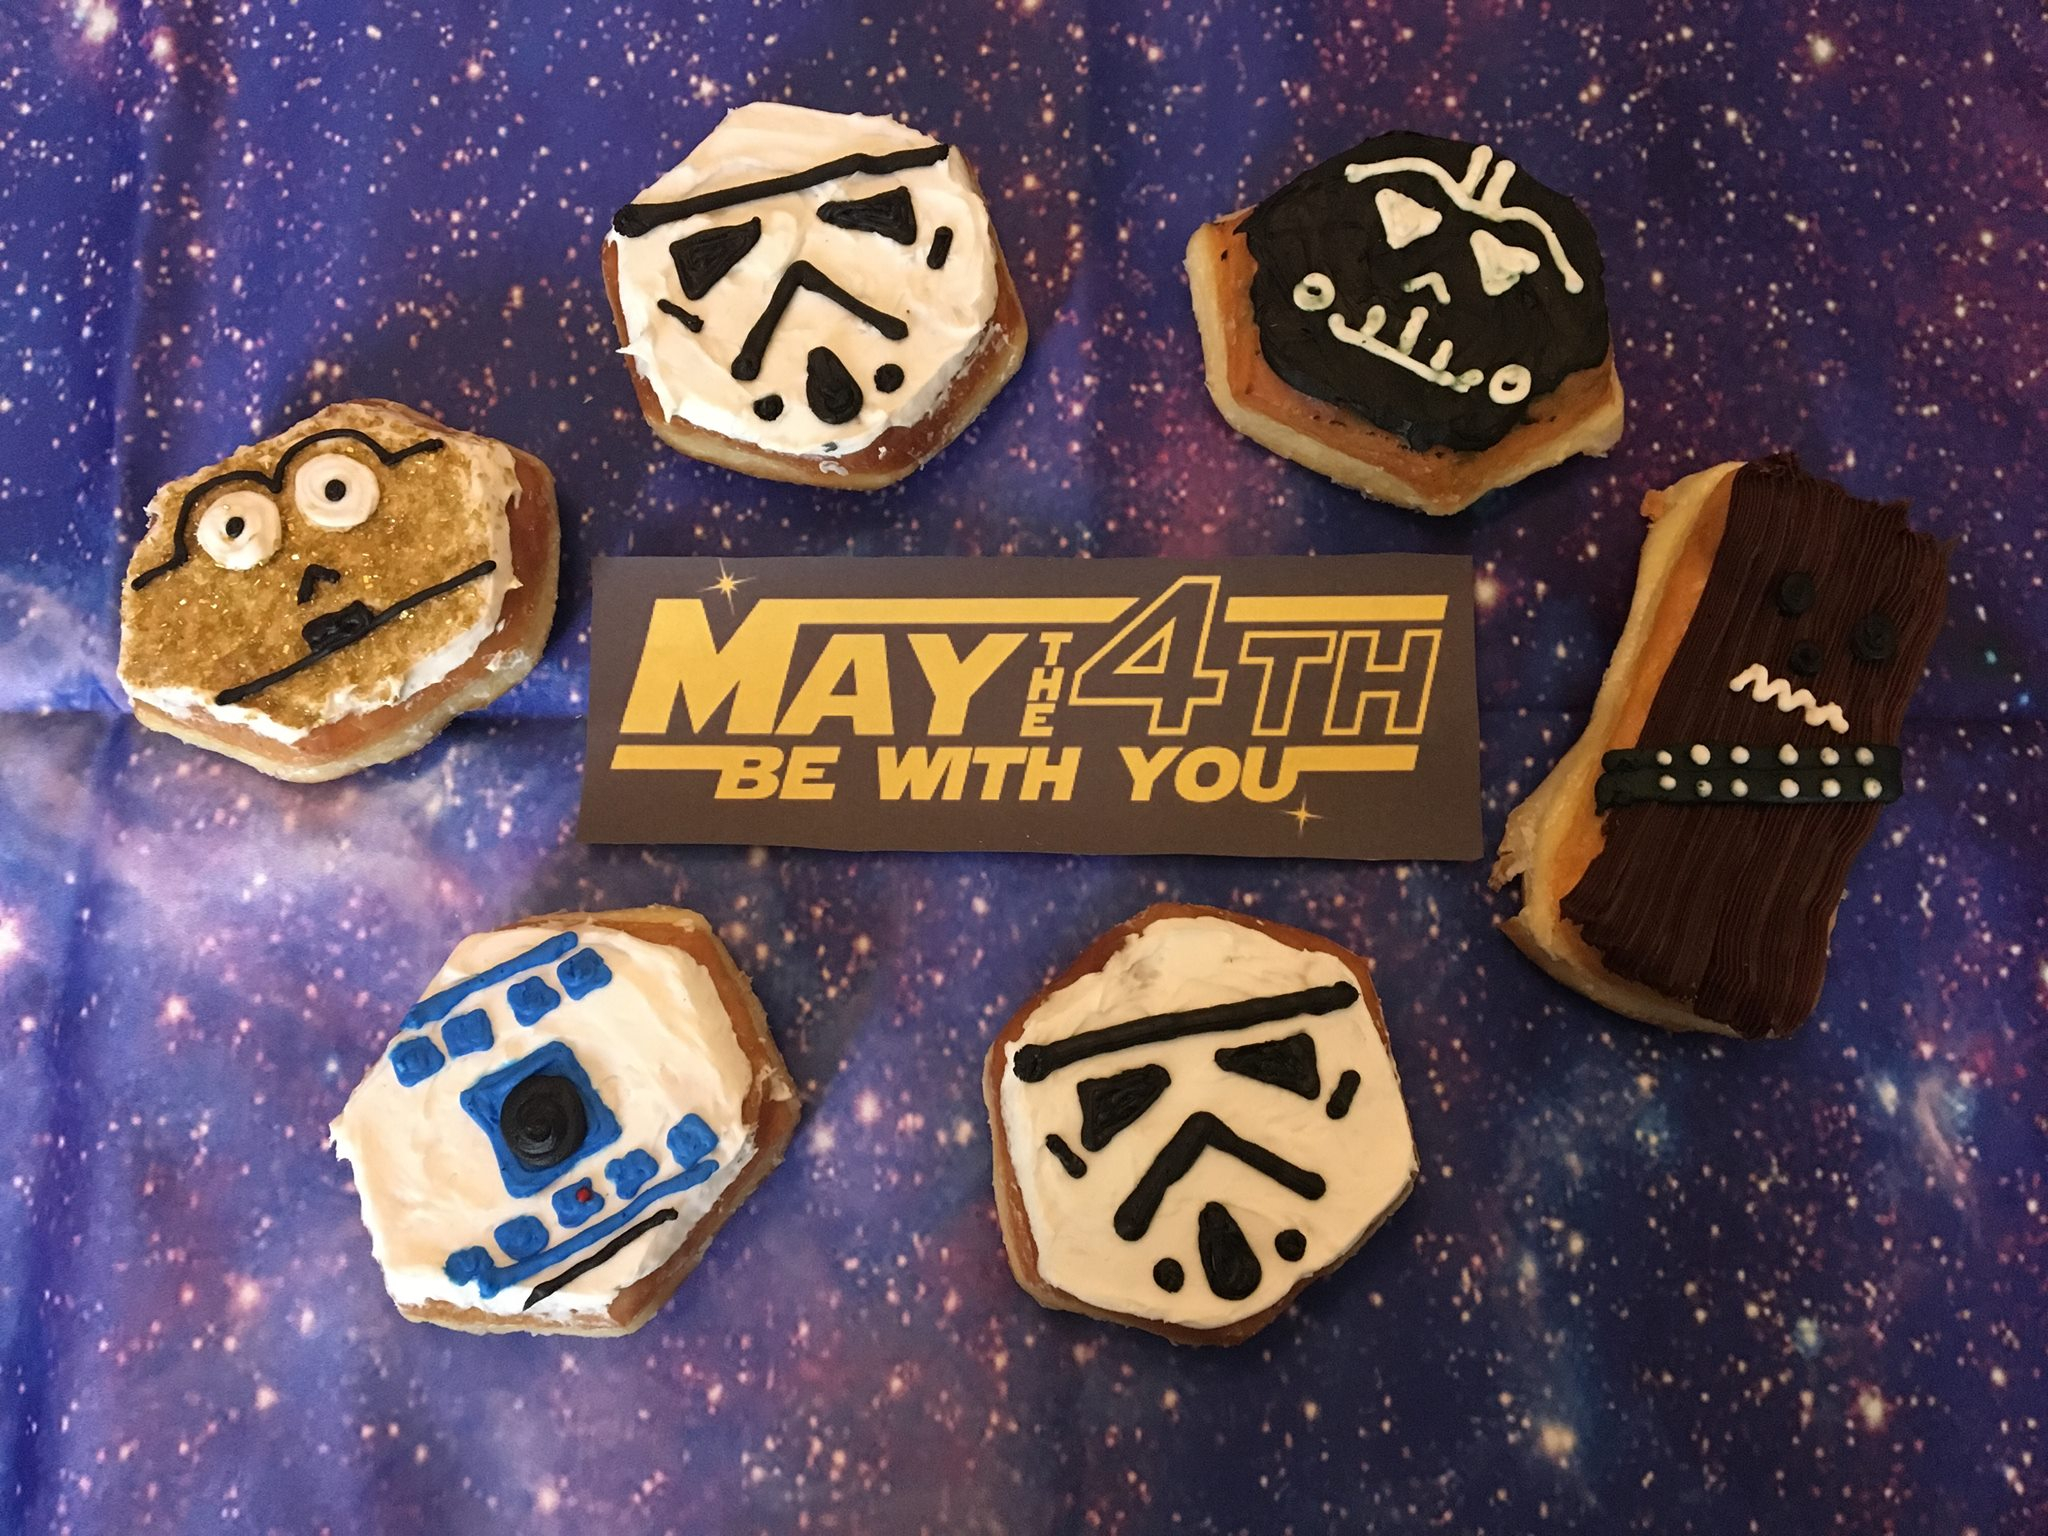 Birmingham, Heavenly Donut Co, May the 4th be with you